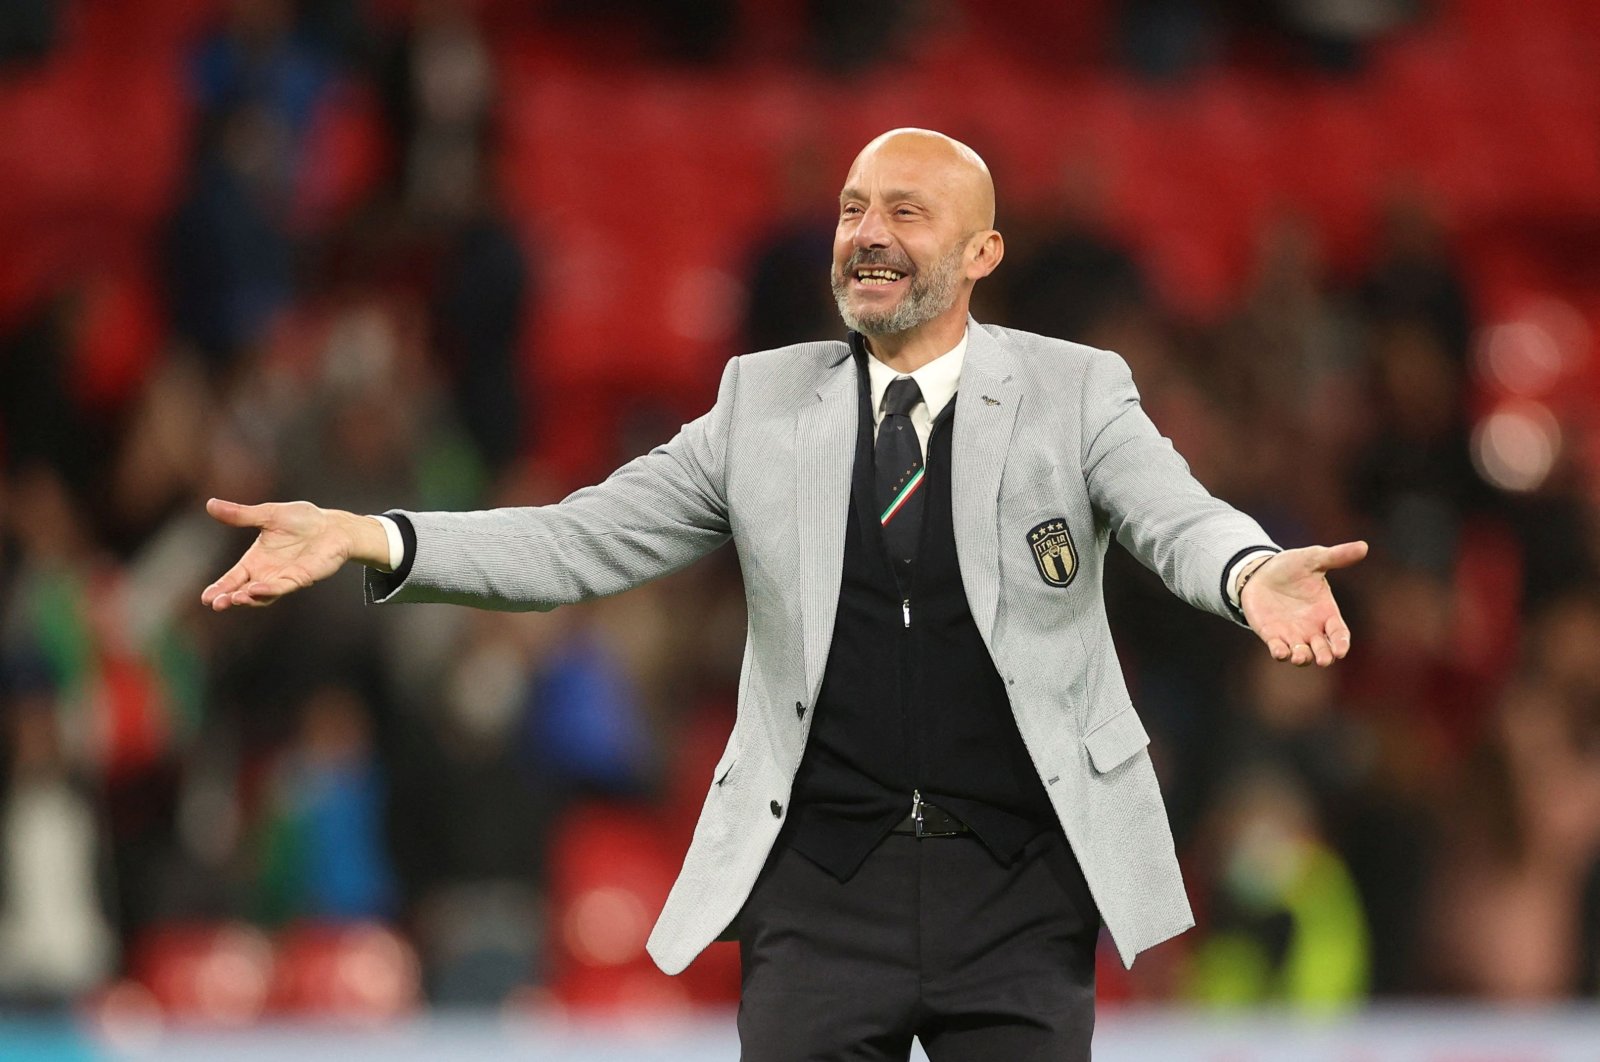 Italy delegation chief Gianluca Vialli celebrates with staff after winning the penalty shootout after a Euro 2020 semifinals match between Italy and Spain at Wembley Stadium, London, Britain, July 6, 2021. (Reuters Photo)